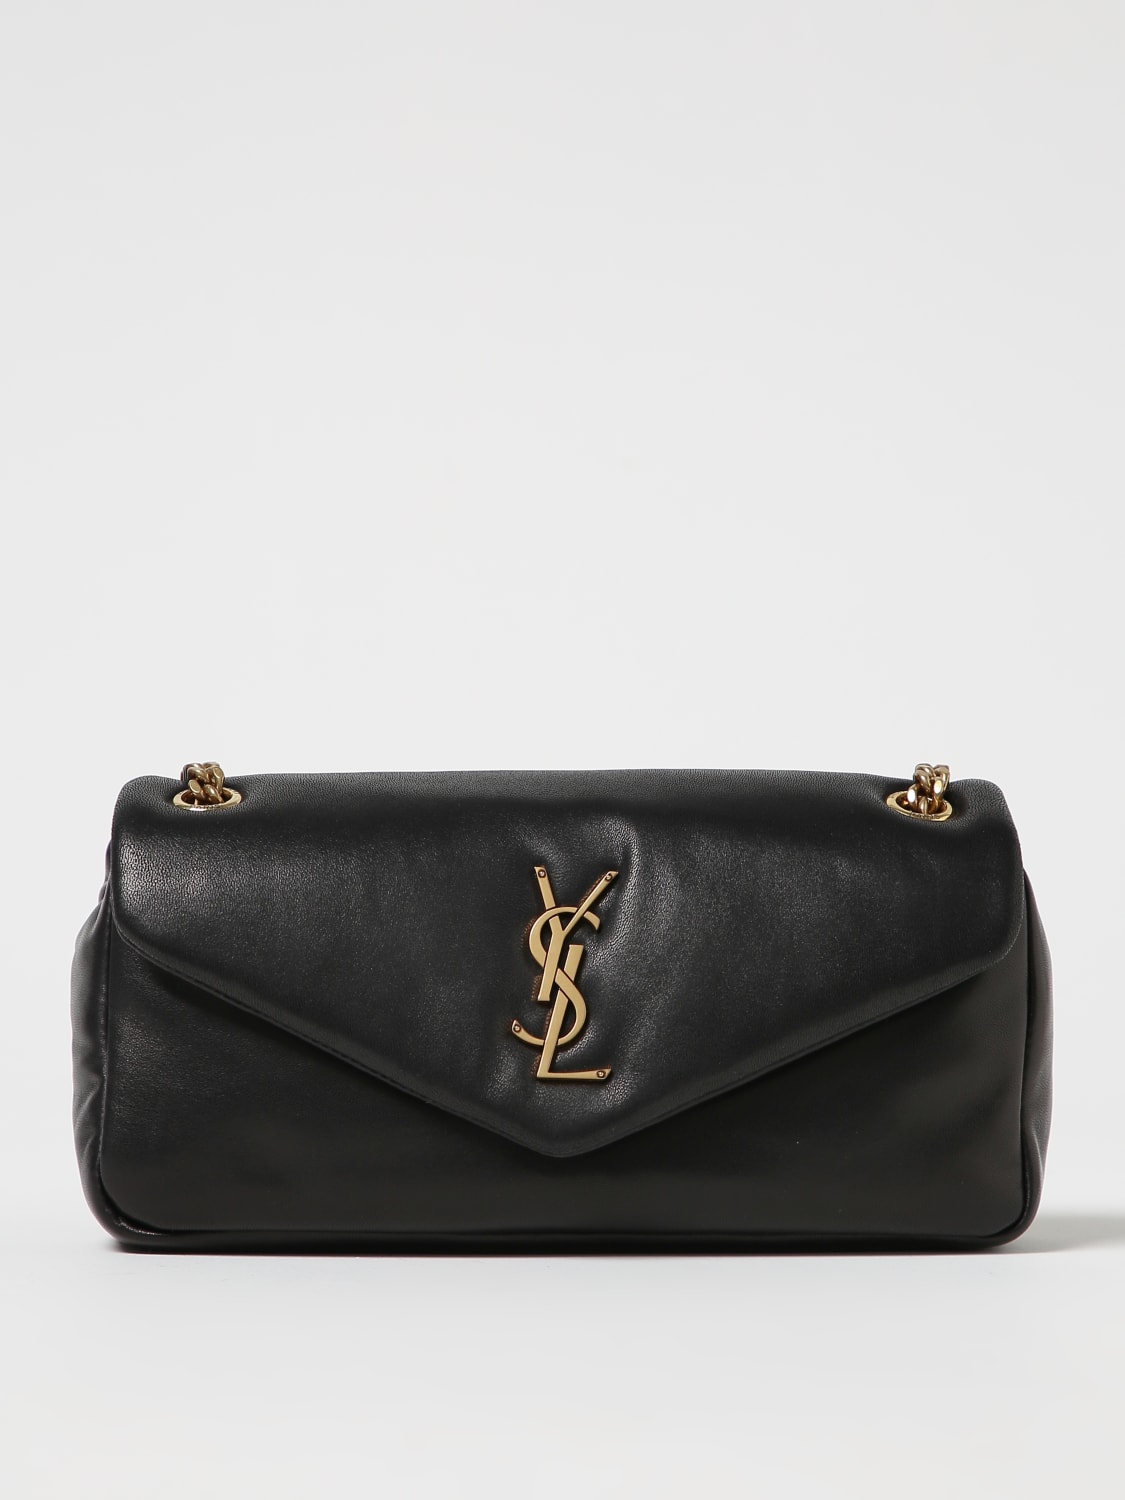 Follow me around the YSL Outlet